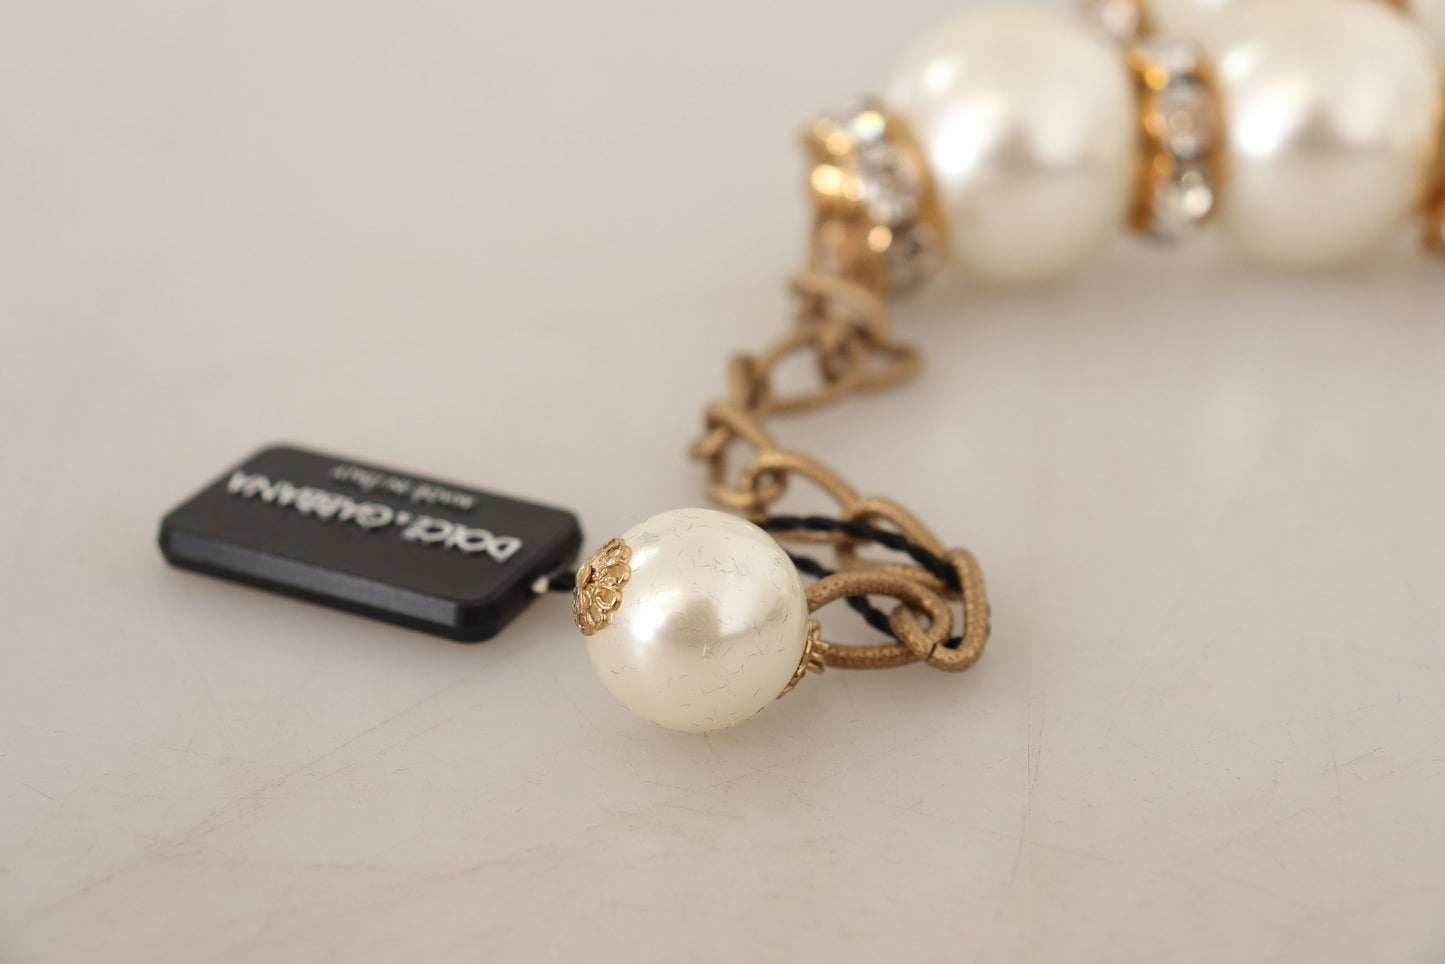 Elegant Faux Pearl Charm Necklace with Crystal Accents